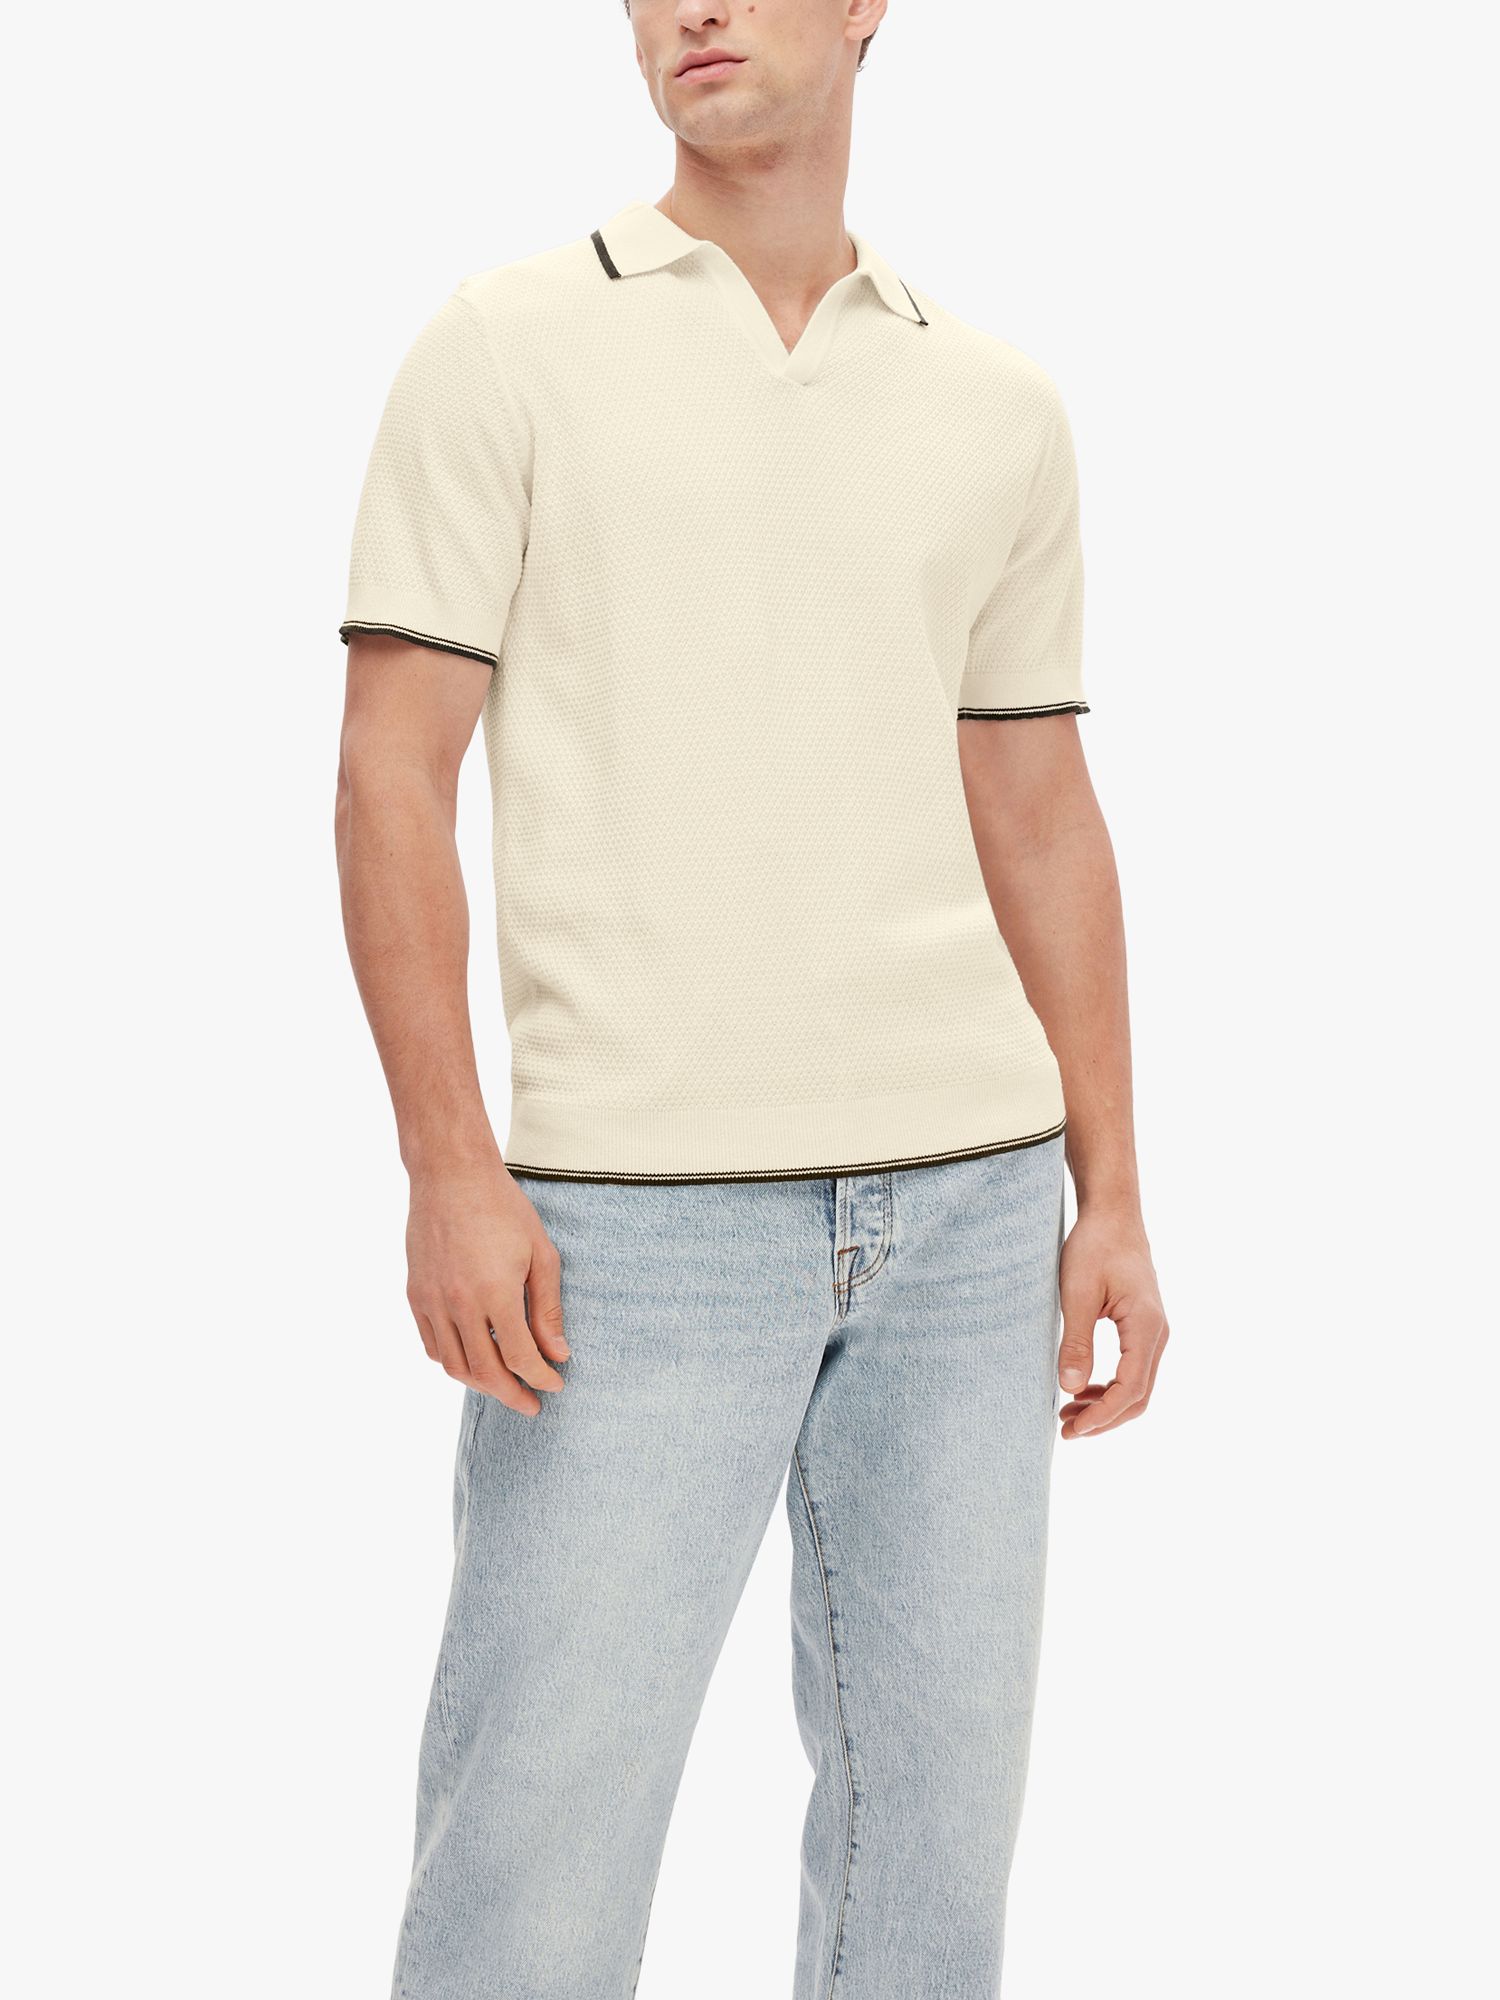 SELECTED HOMME Knitted Polo Shirt, Cream, S